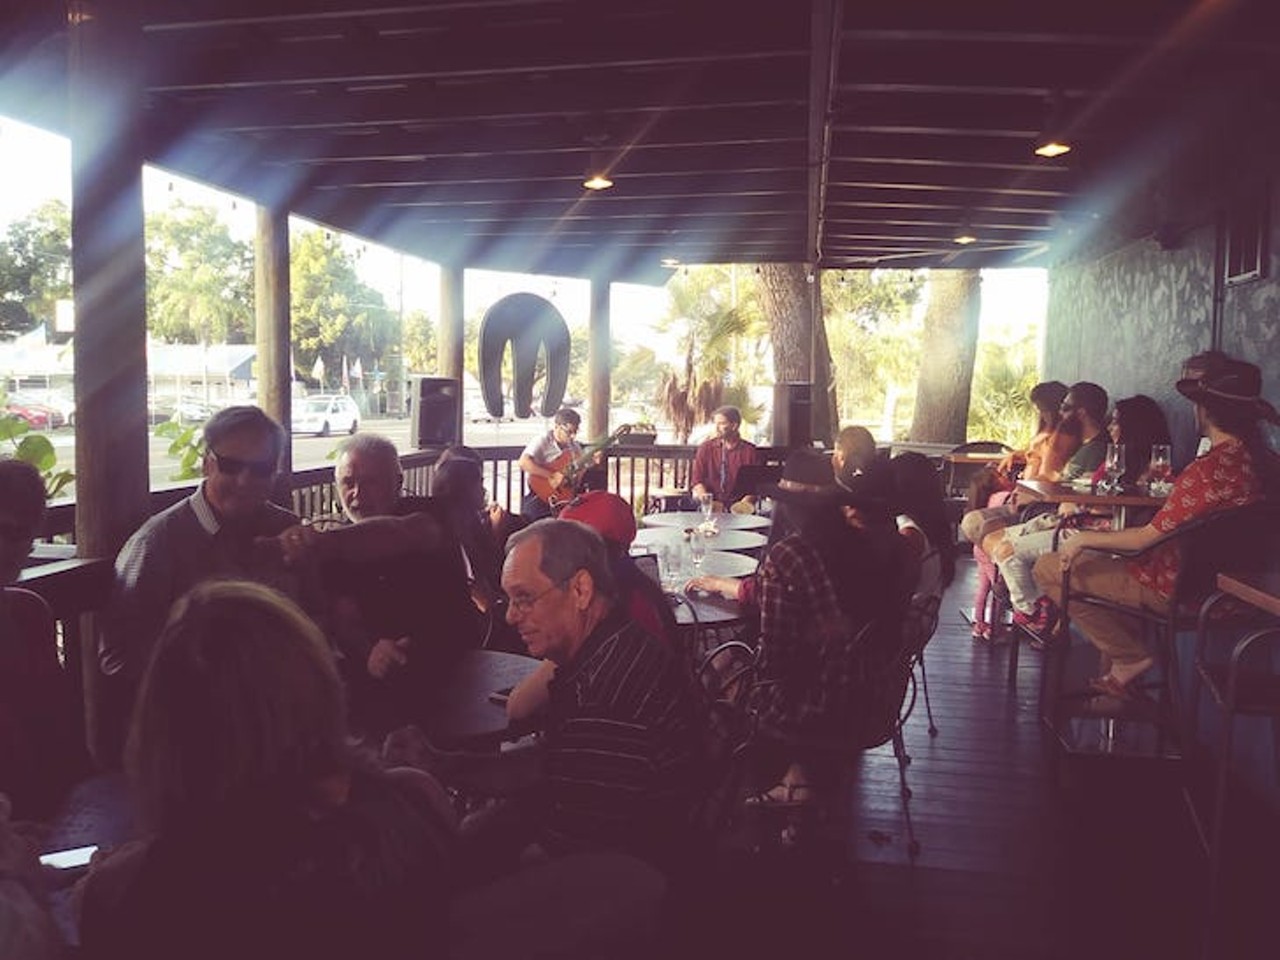 Mermaid Tavern  
6719 N Nebraska Ave., Tampa, 813-238-5618
Dim lighting for their few tables inside, but plenty of seating outside on picnic tables and on the patio. Order at the counter, and the server will find you when your food is ready. 
Photo via Mermaid Tavern/ Facebook 